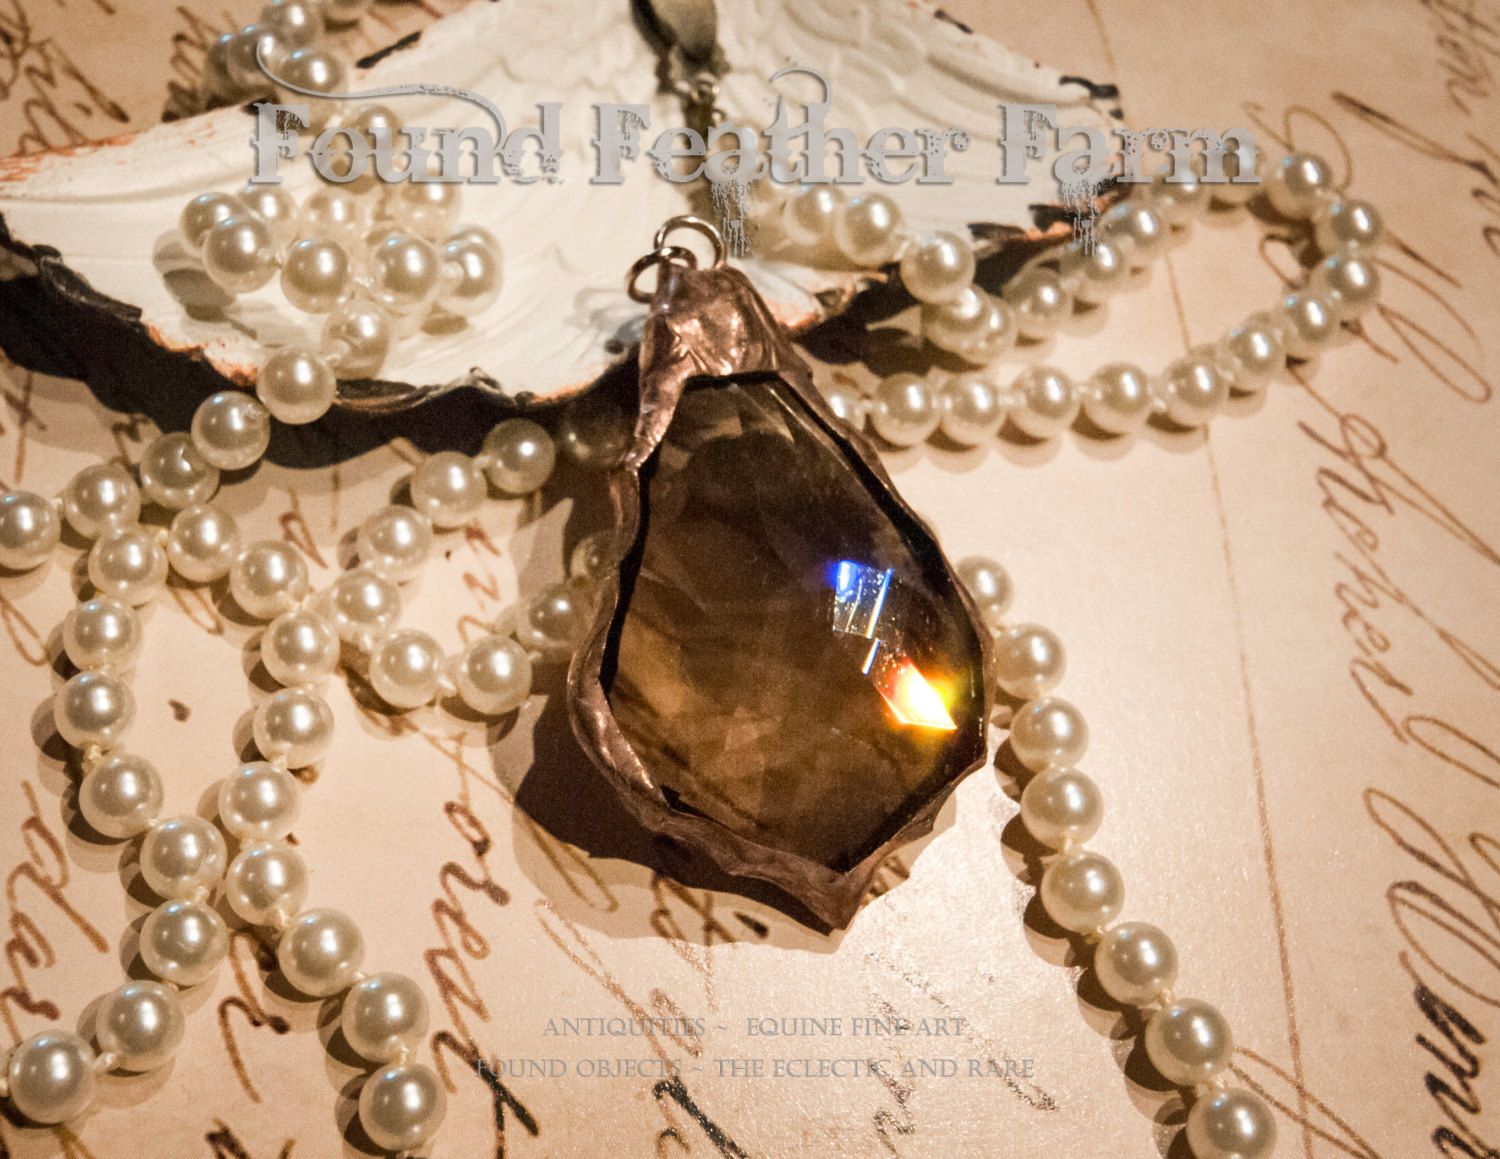 Handmade Soldered Crystal Pendant, Bohemian Jewelry Pendant Pertaining To 2019 Sparkling Teardrop Chandelier Pendant Necklaces (View 6 of 25)